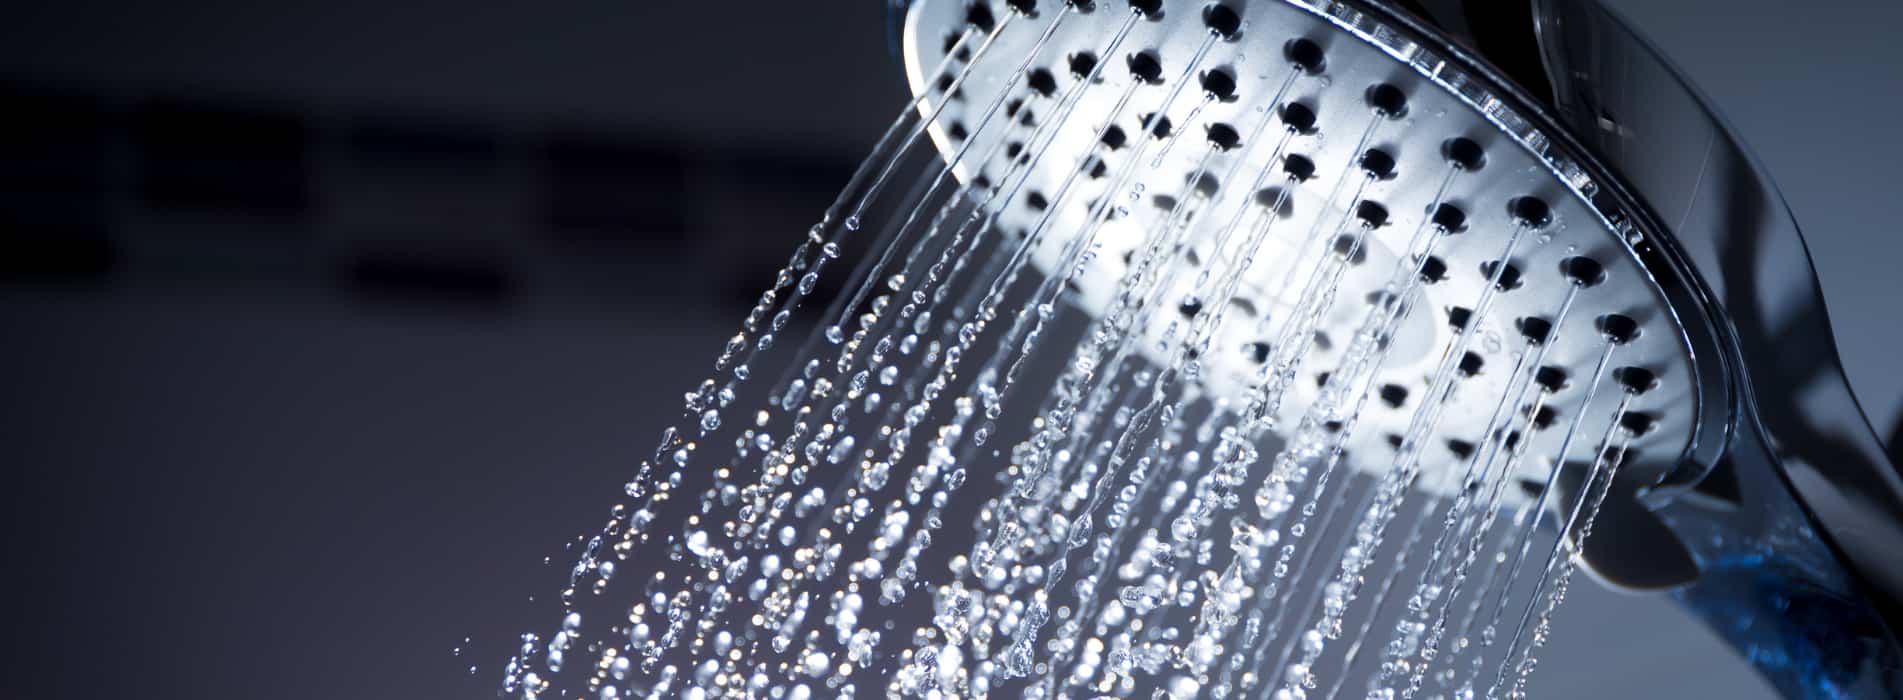 Do cold showers help you lose weight?